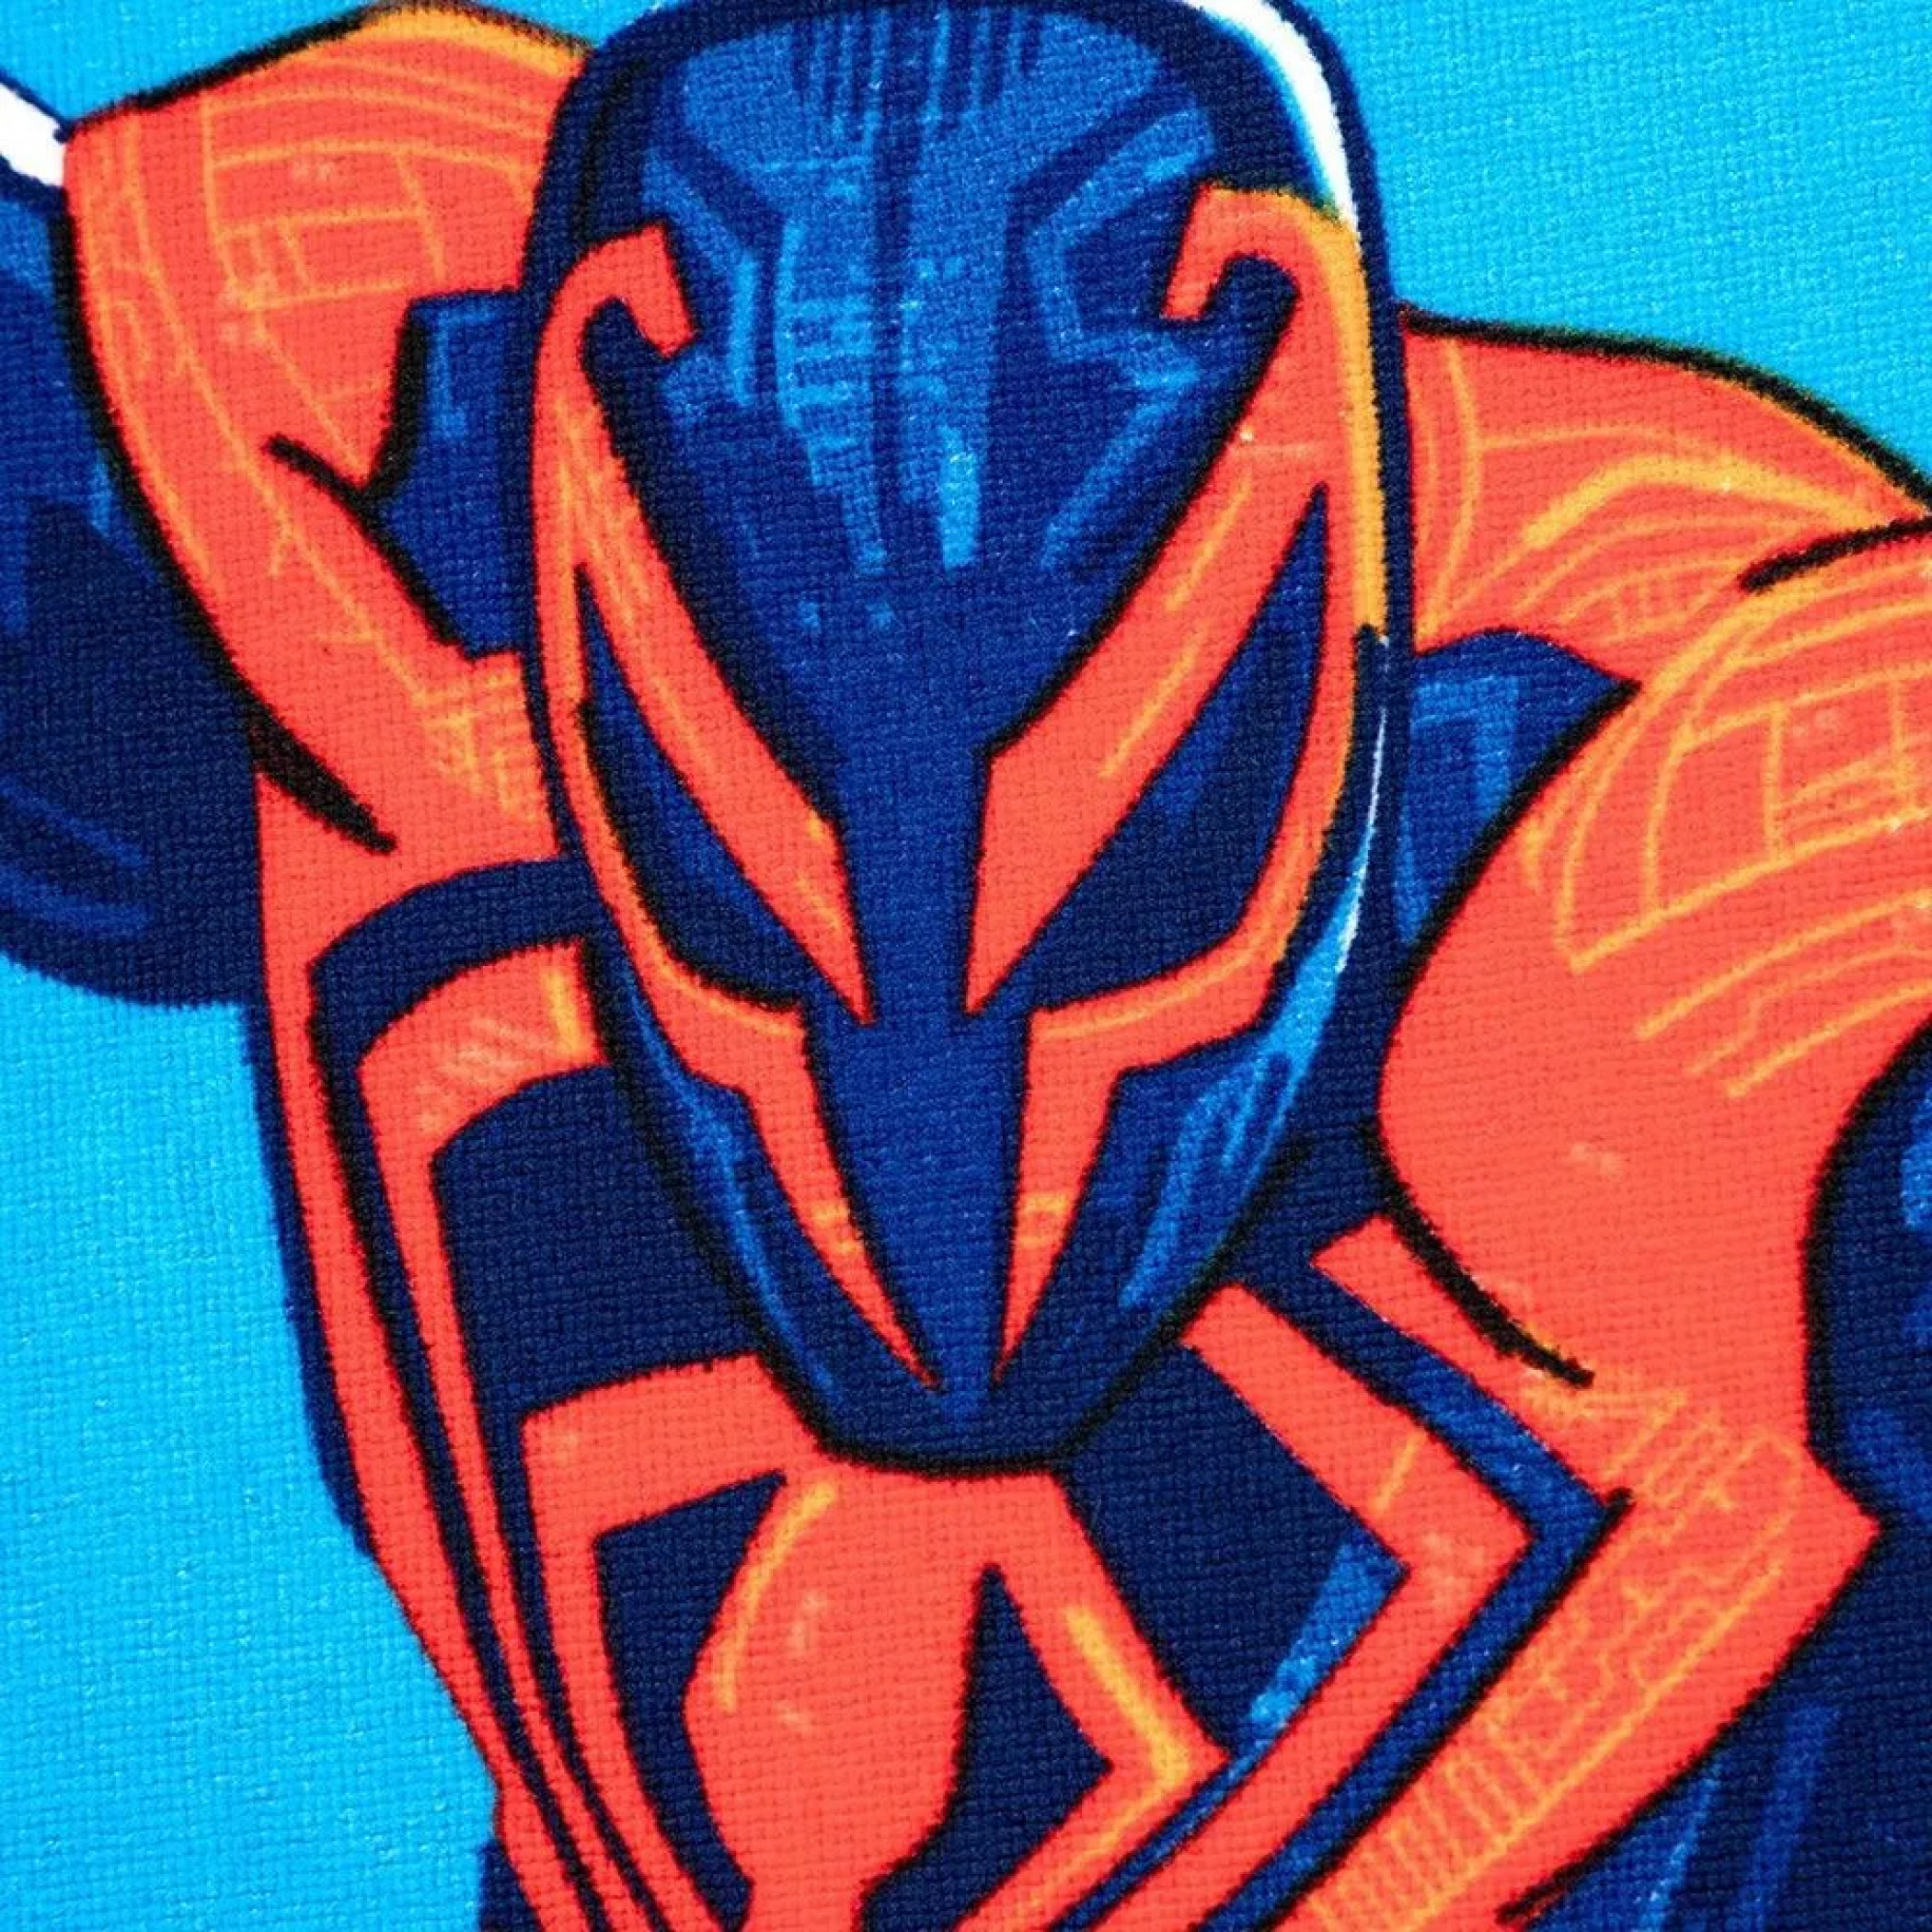 Miles Morales and Spider-Man 2099 Beach Towel